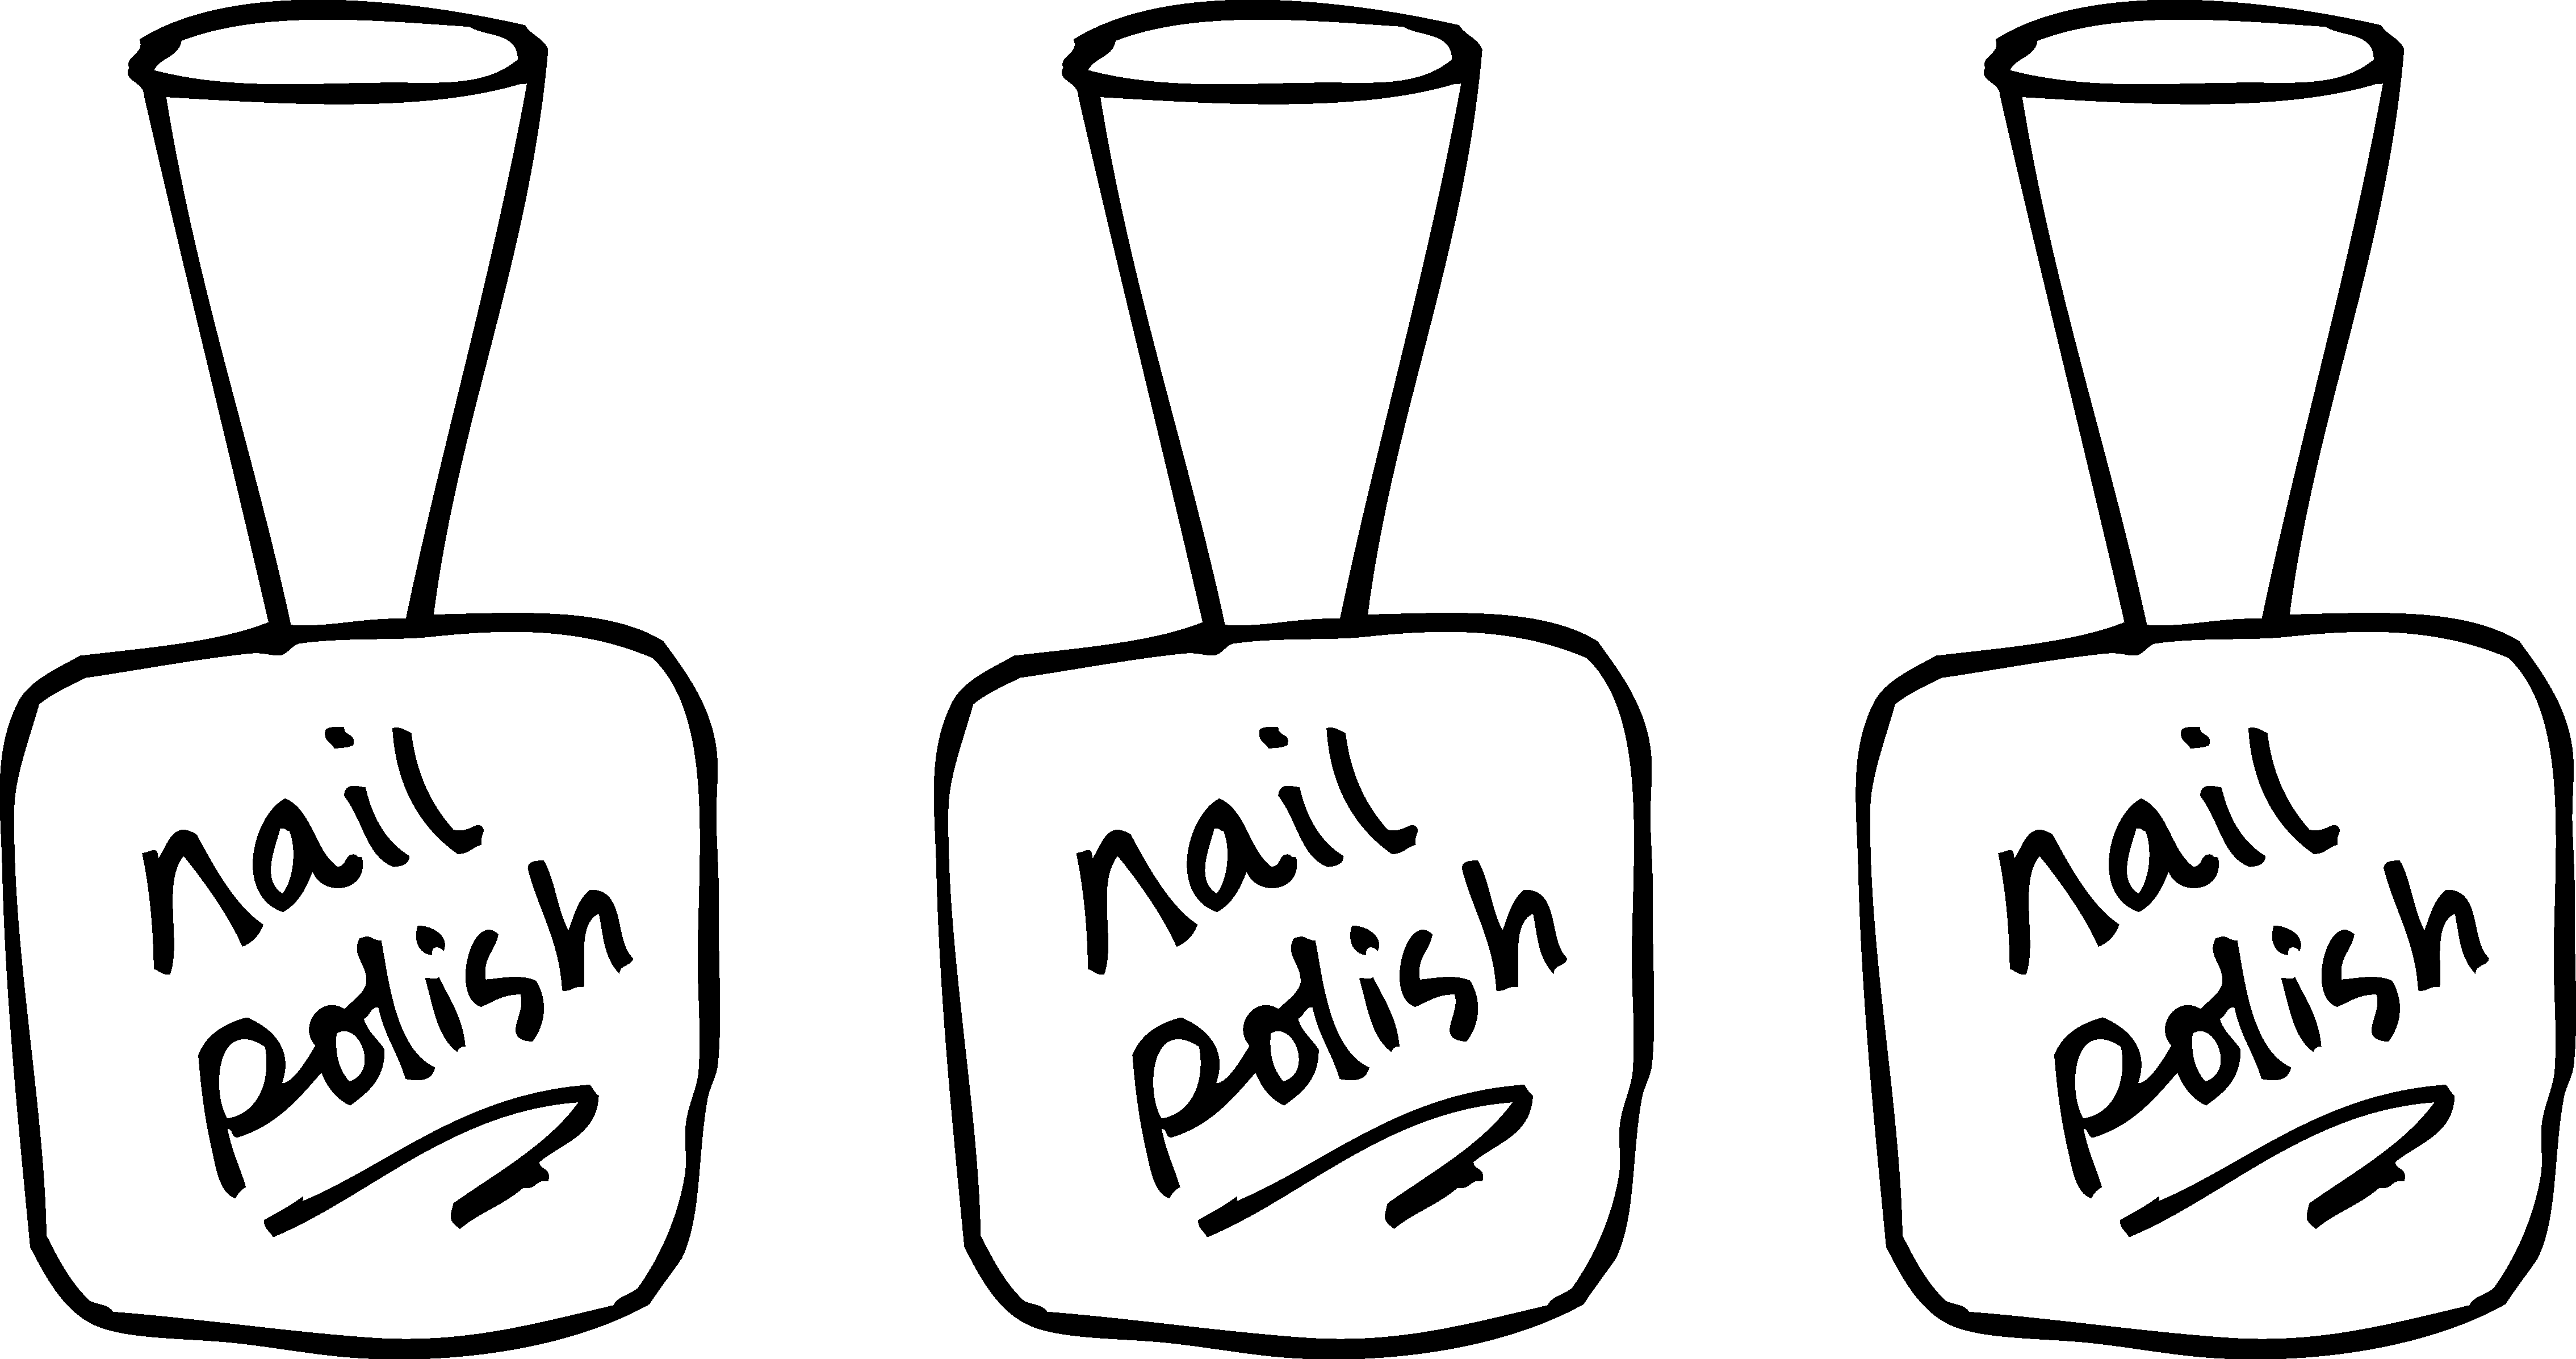 7. Nail polish bottle clip art black and white silhouette - wide 10